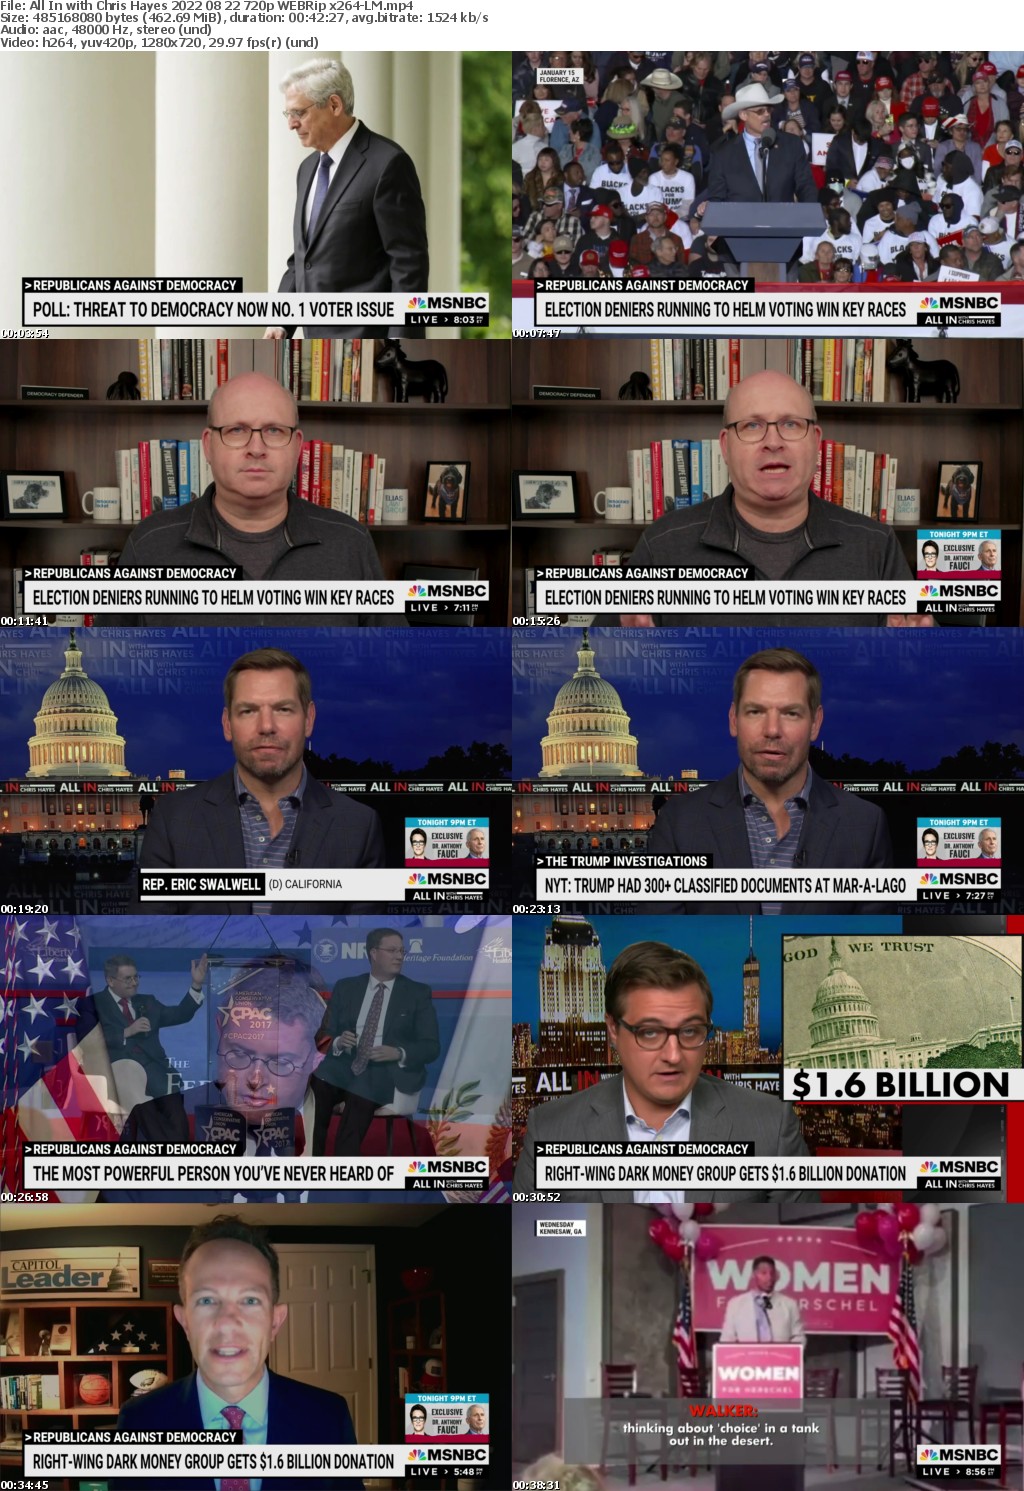 All In with Chris Hayes 2022 08 22 720p WEBRip x264-LM